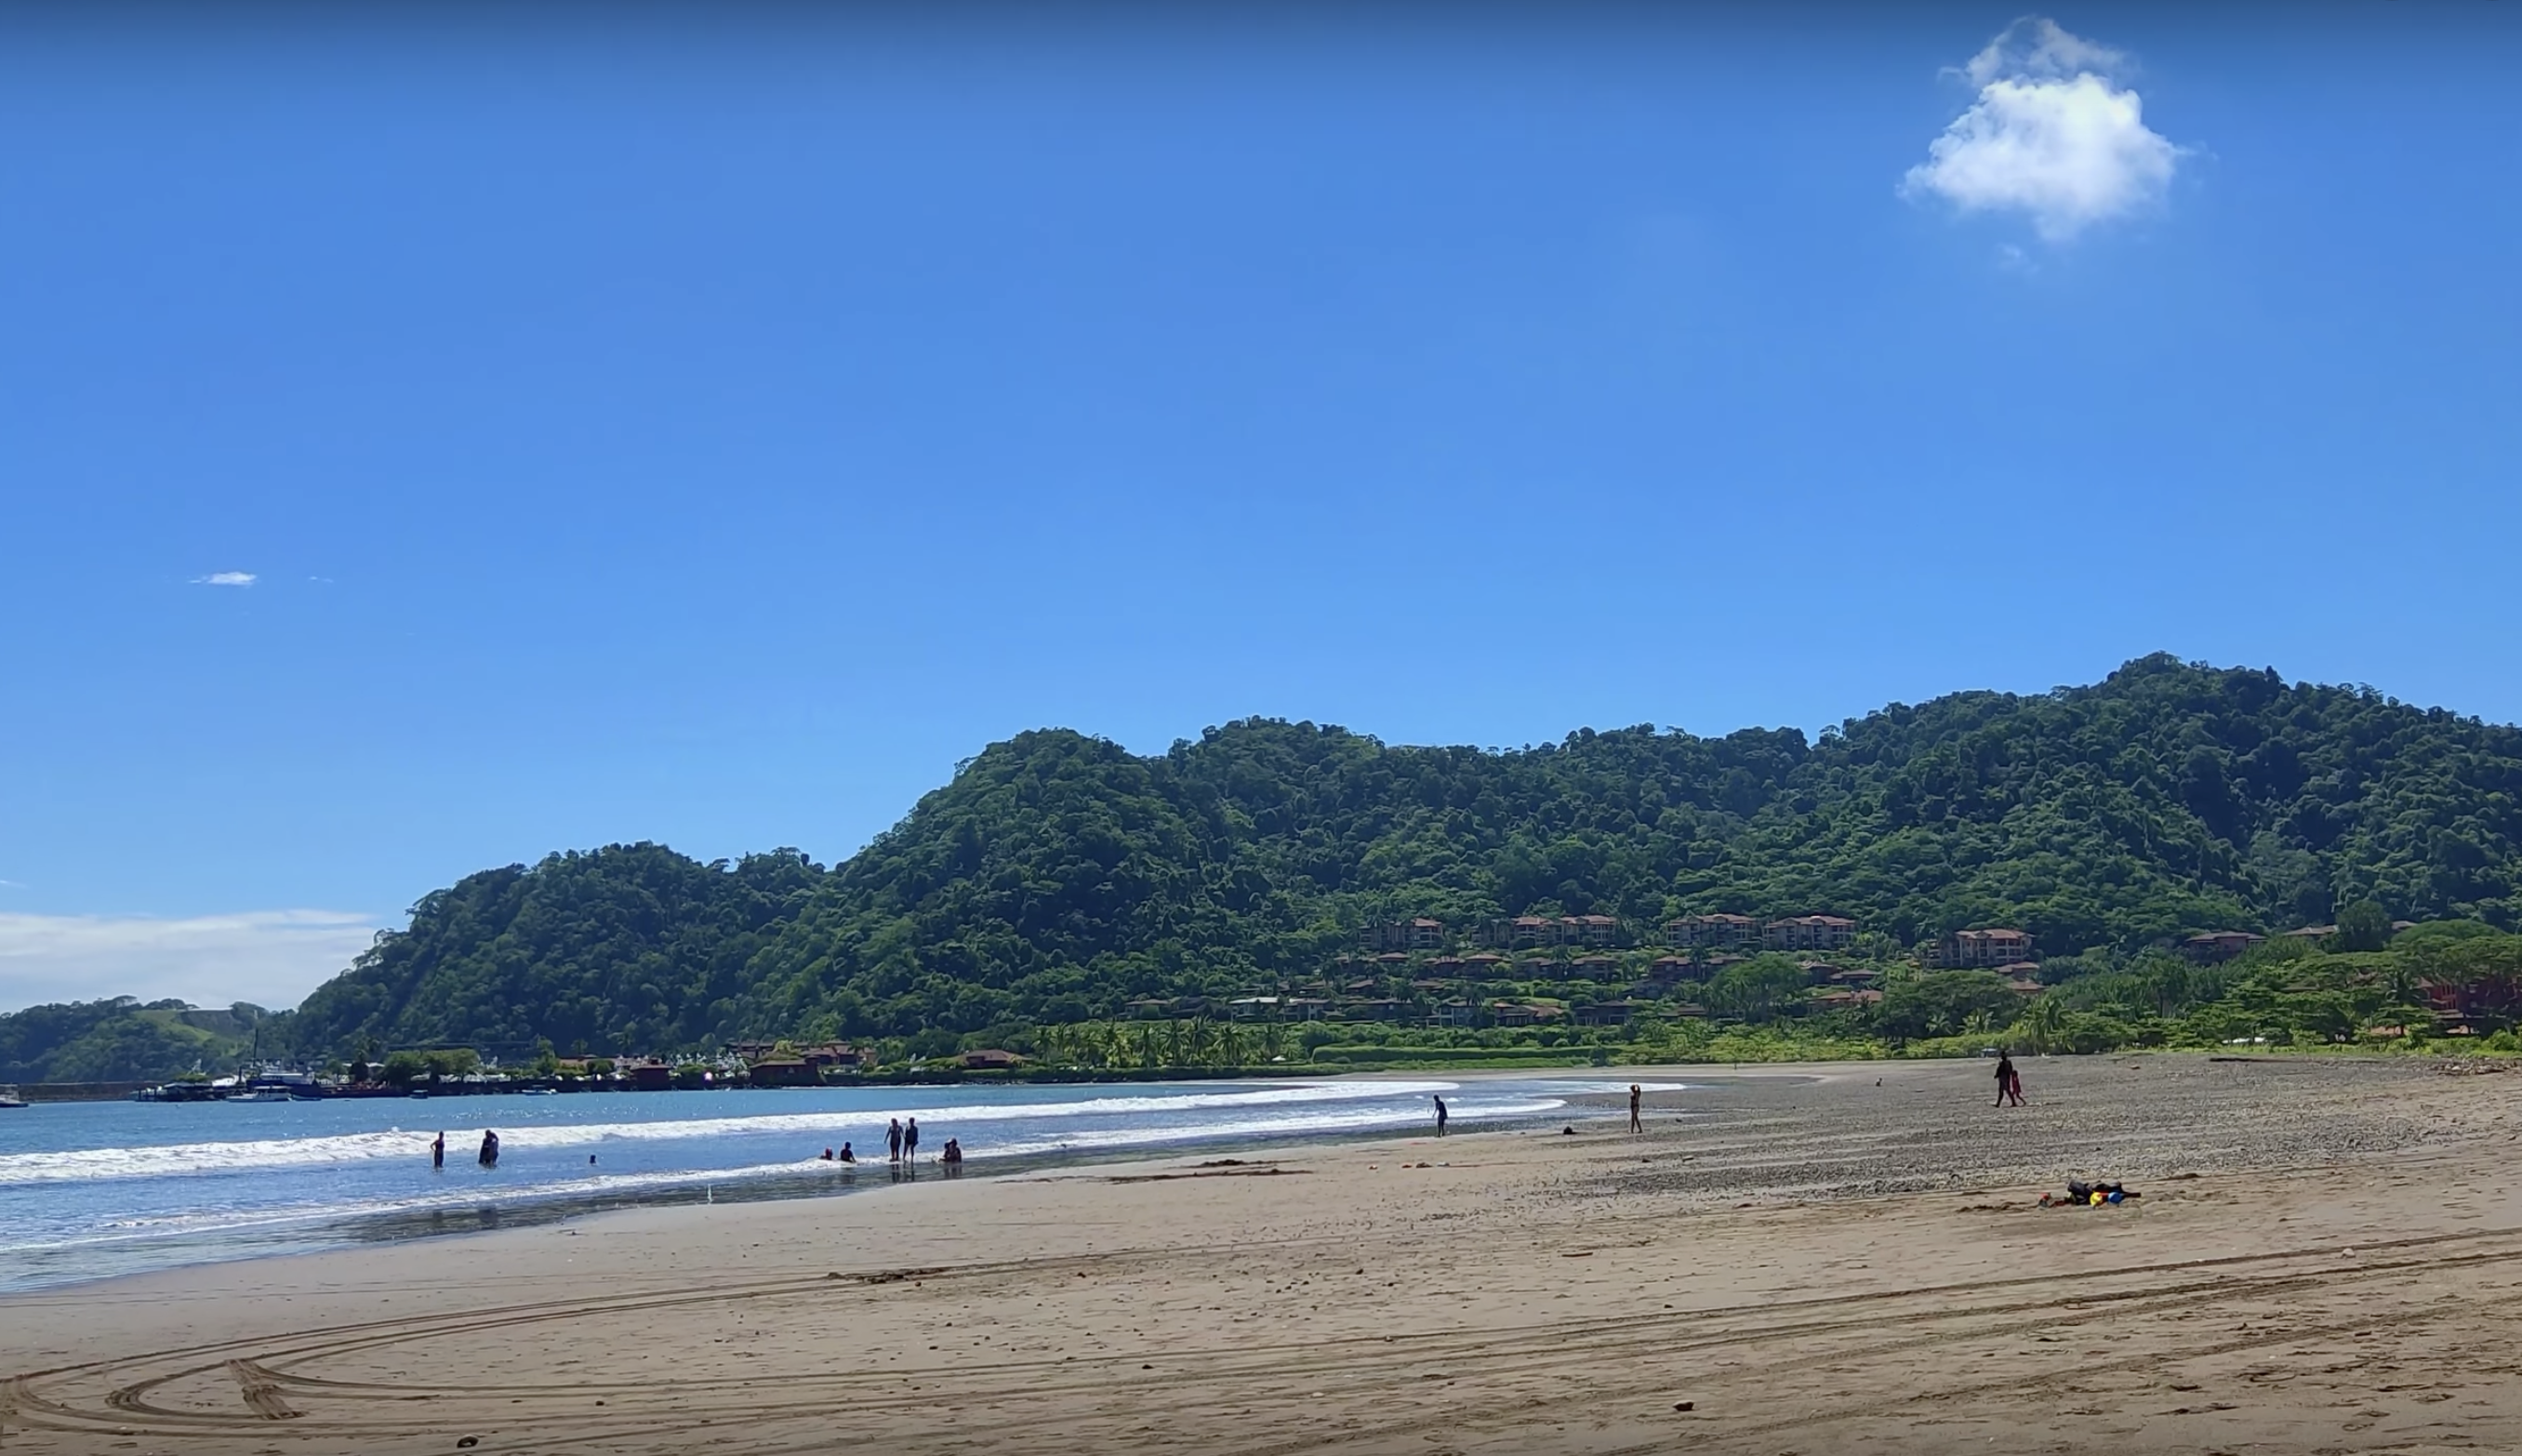 playa herradura beach puntarenas costa rica things to do stuff to see tourism tours vacations rentals visitor guides 63098